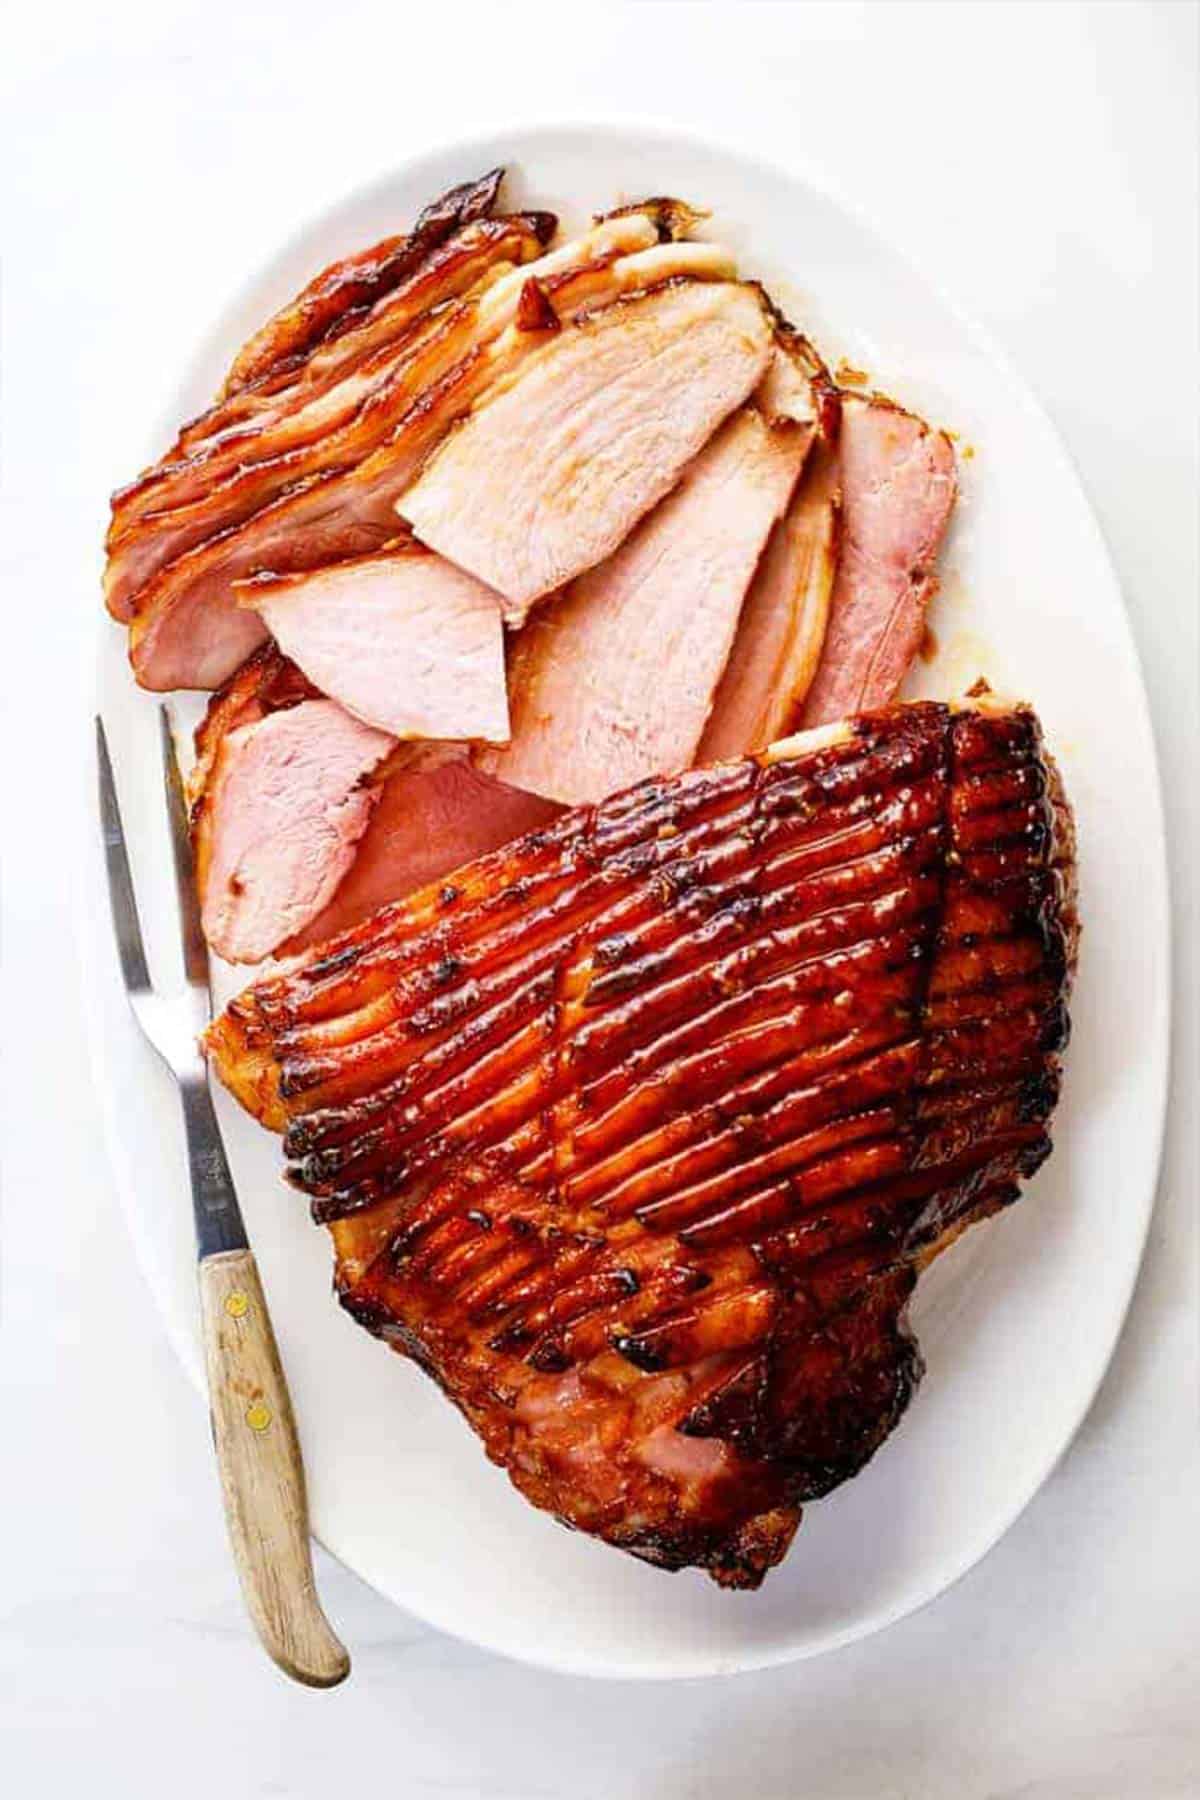 A whole glazed ham with honey with slices of ham ready to serve